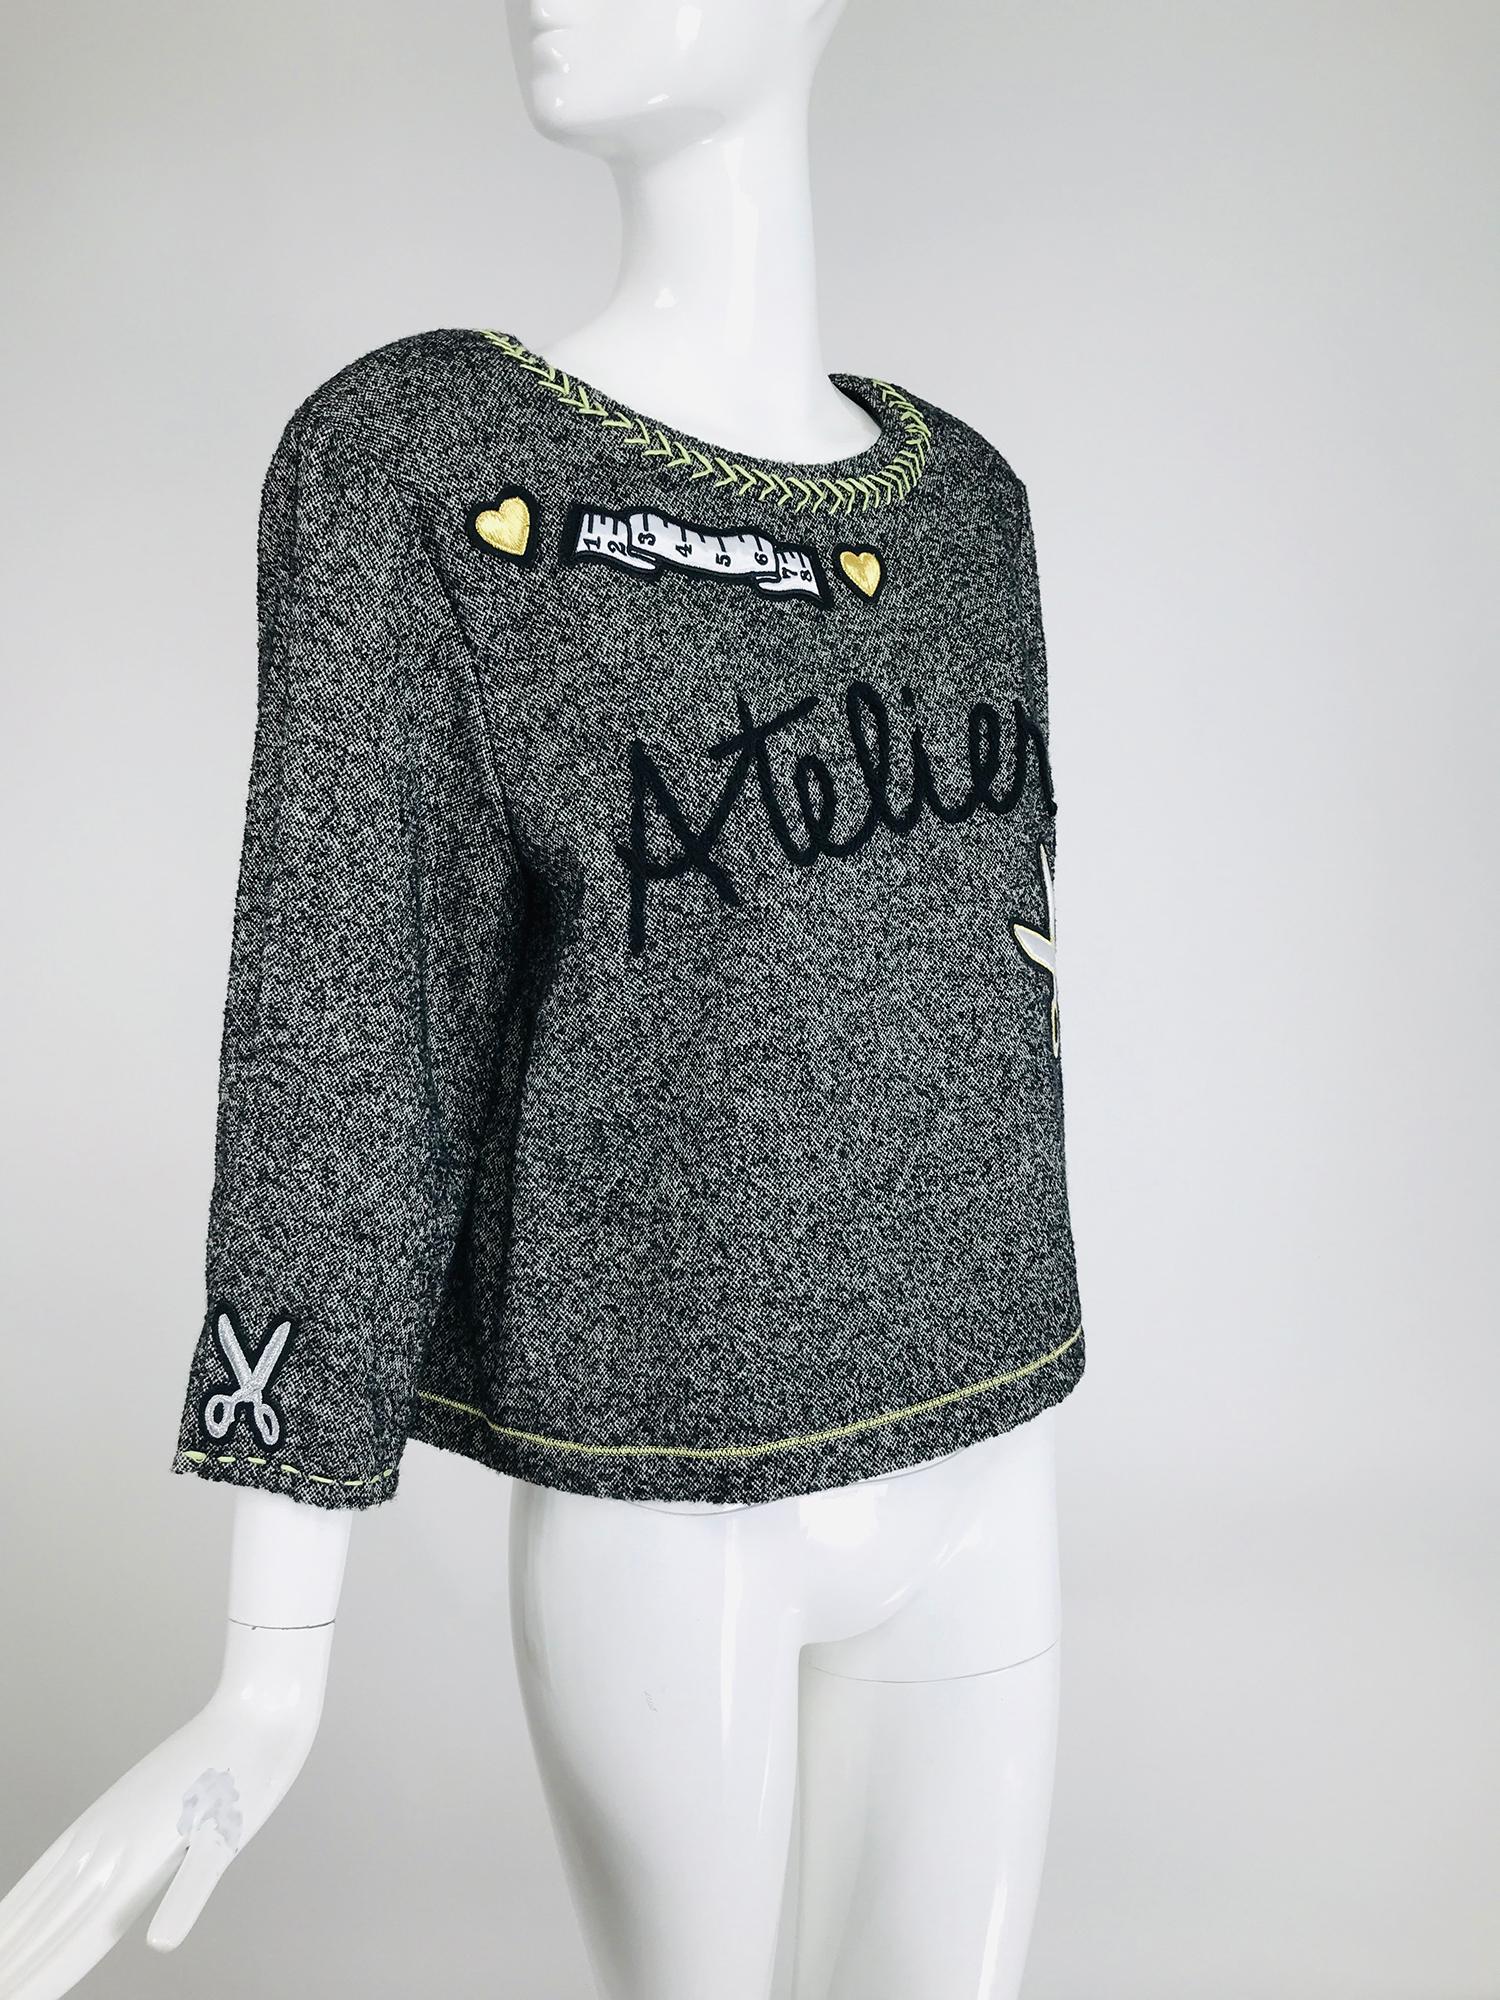 Moschino Cheap & Chic Atelier! tweed applique top 2015. Black & grey tweed, long sleeve pull on top is appliqued with hearts, scissors & tape measures, embroidered at the front with Atelier!. Fully lined in black acetate. Closes at the upper back